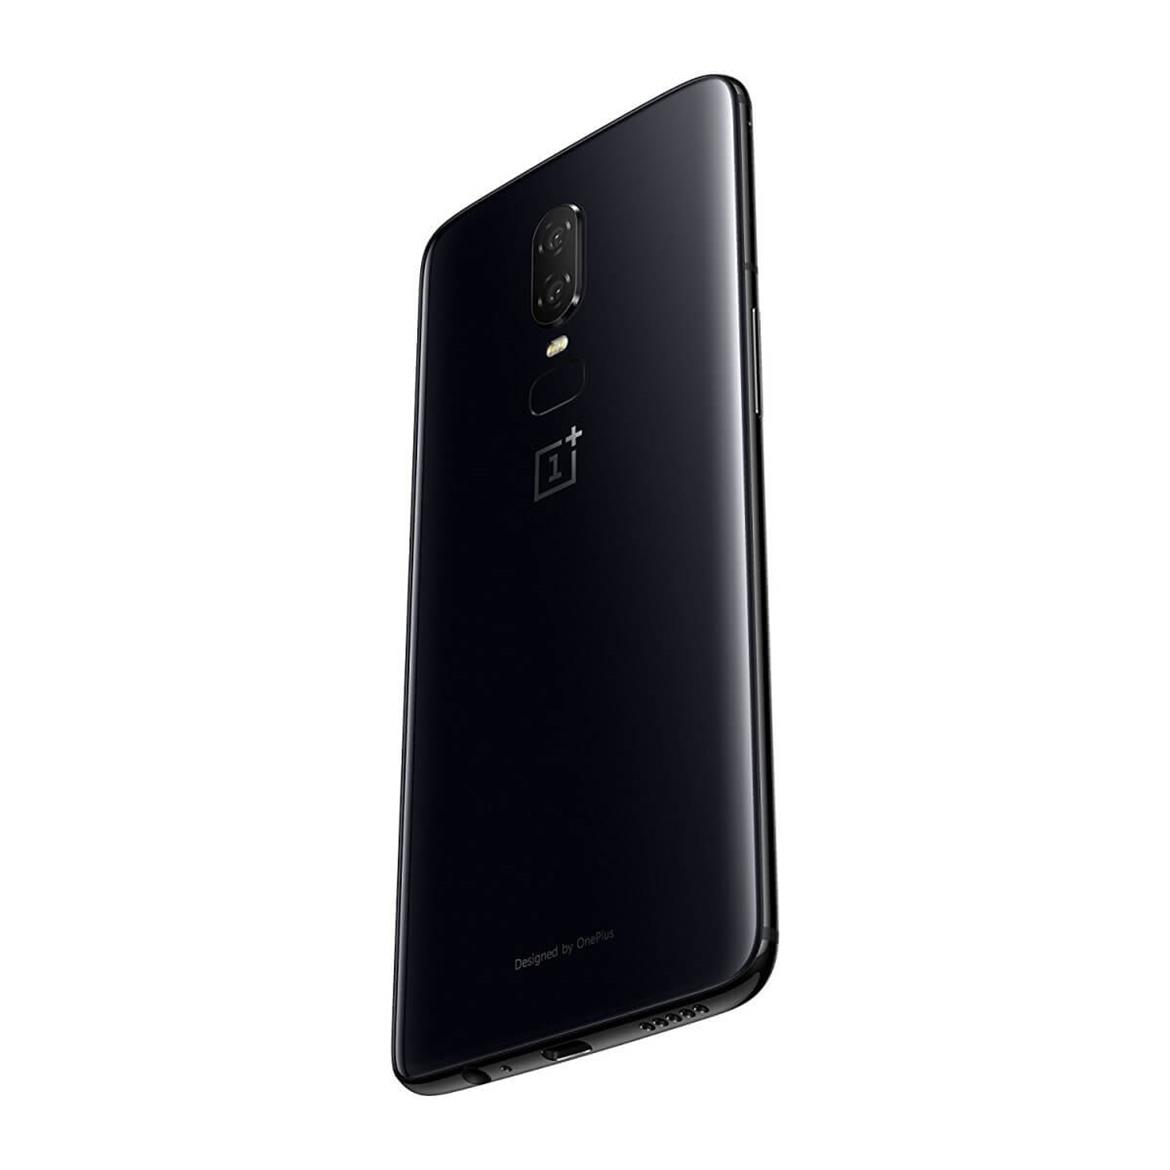 OnePlus 6 Flagship Android Phone With Mirror Black Finish Leaks On Amazon